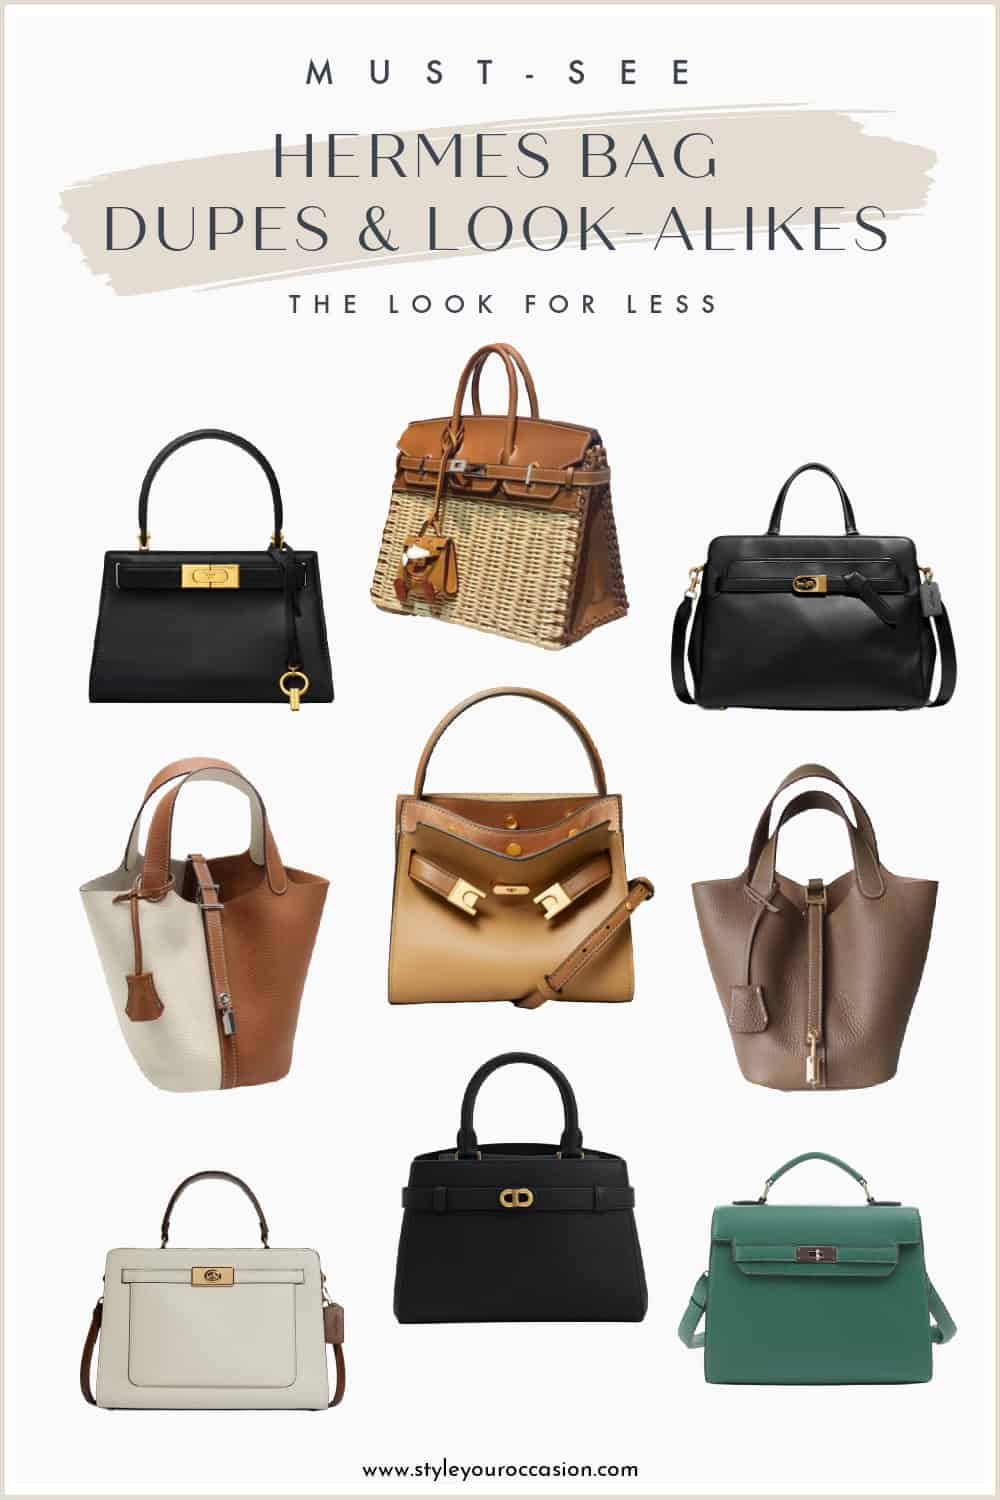 an image board of Hermes bag dupes and look-alikes